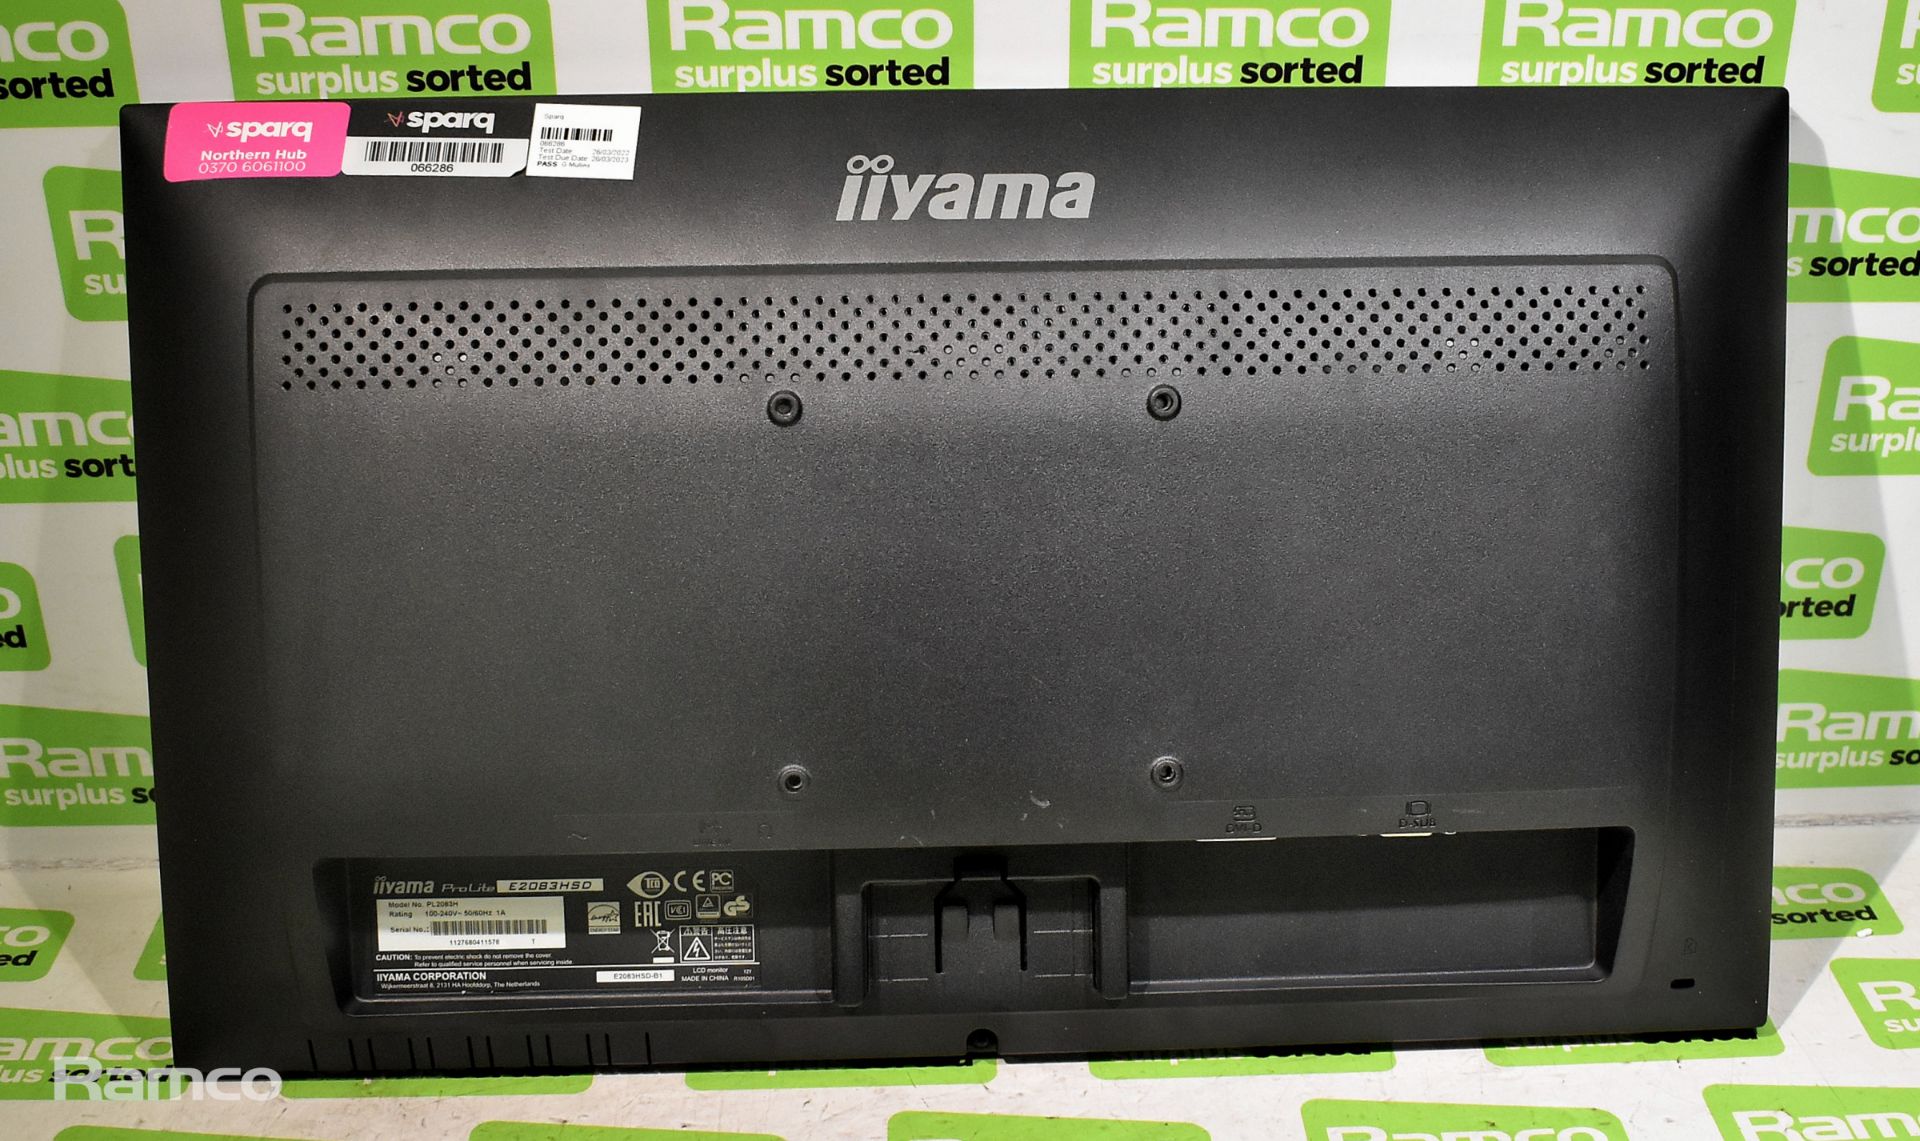 IIyama ProLite E2083HSD 20" monitor with 1600x900 resolution, in box with stand and plug - Image 3 of 6